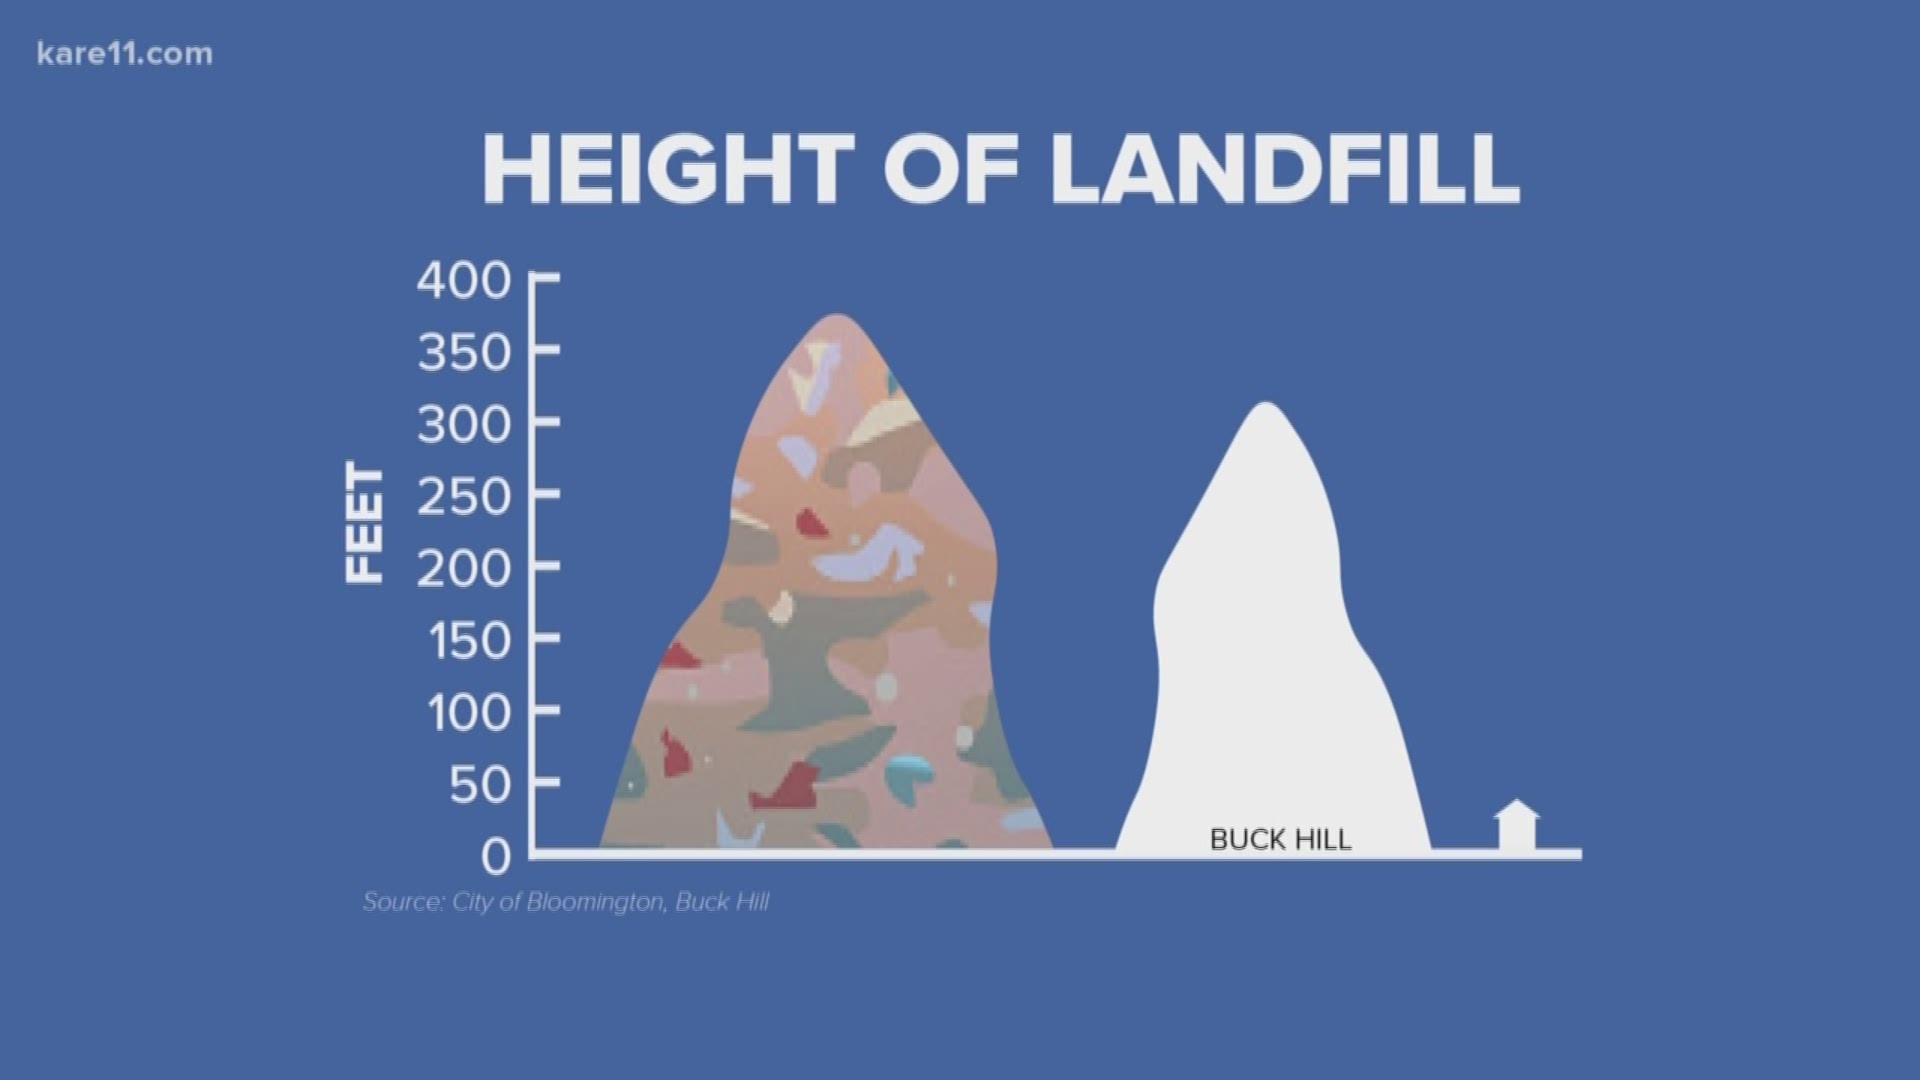 The proposed landfill would be higher than Buck Hill.